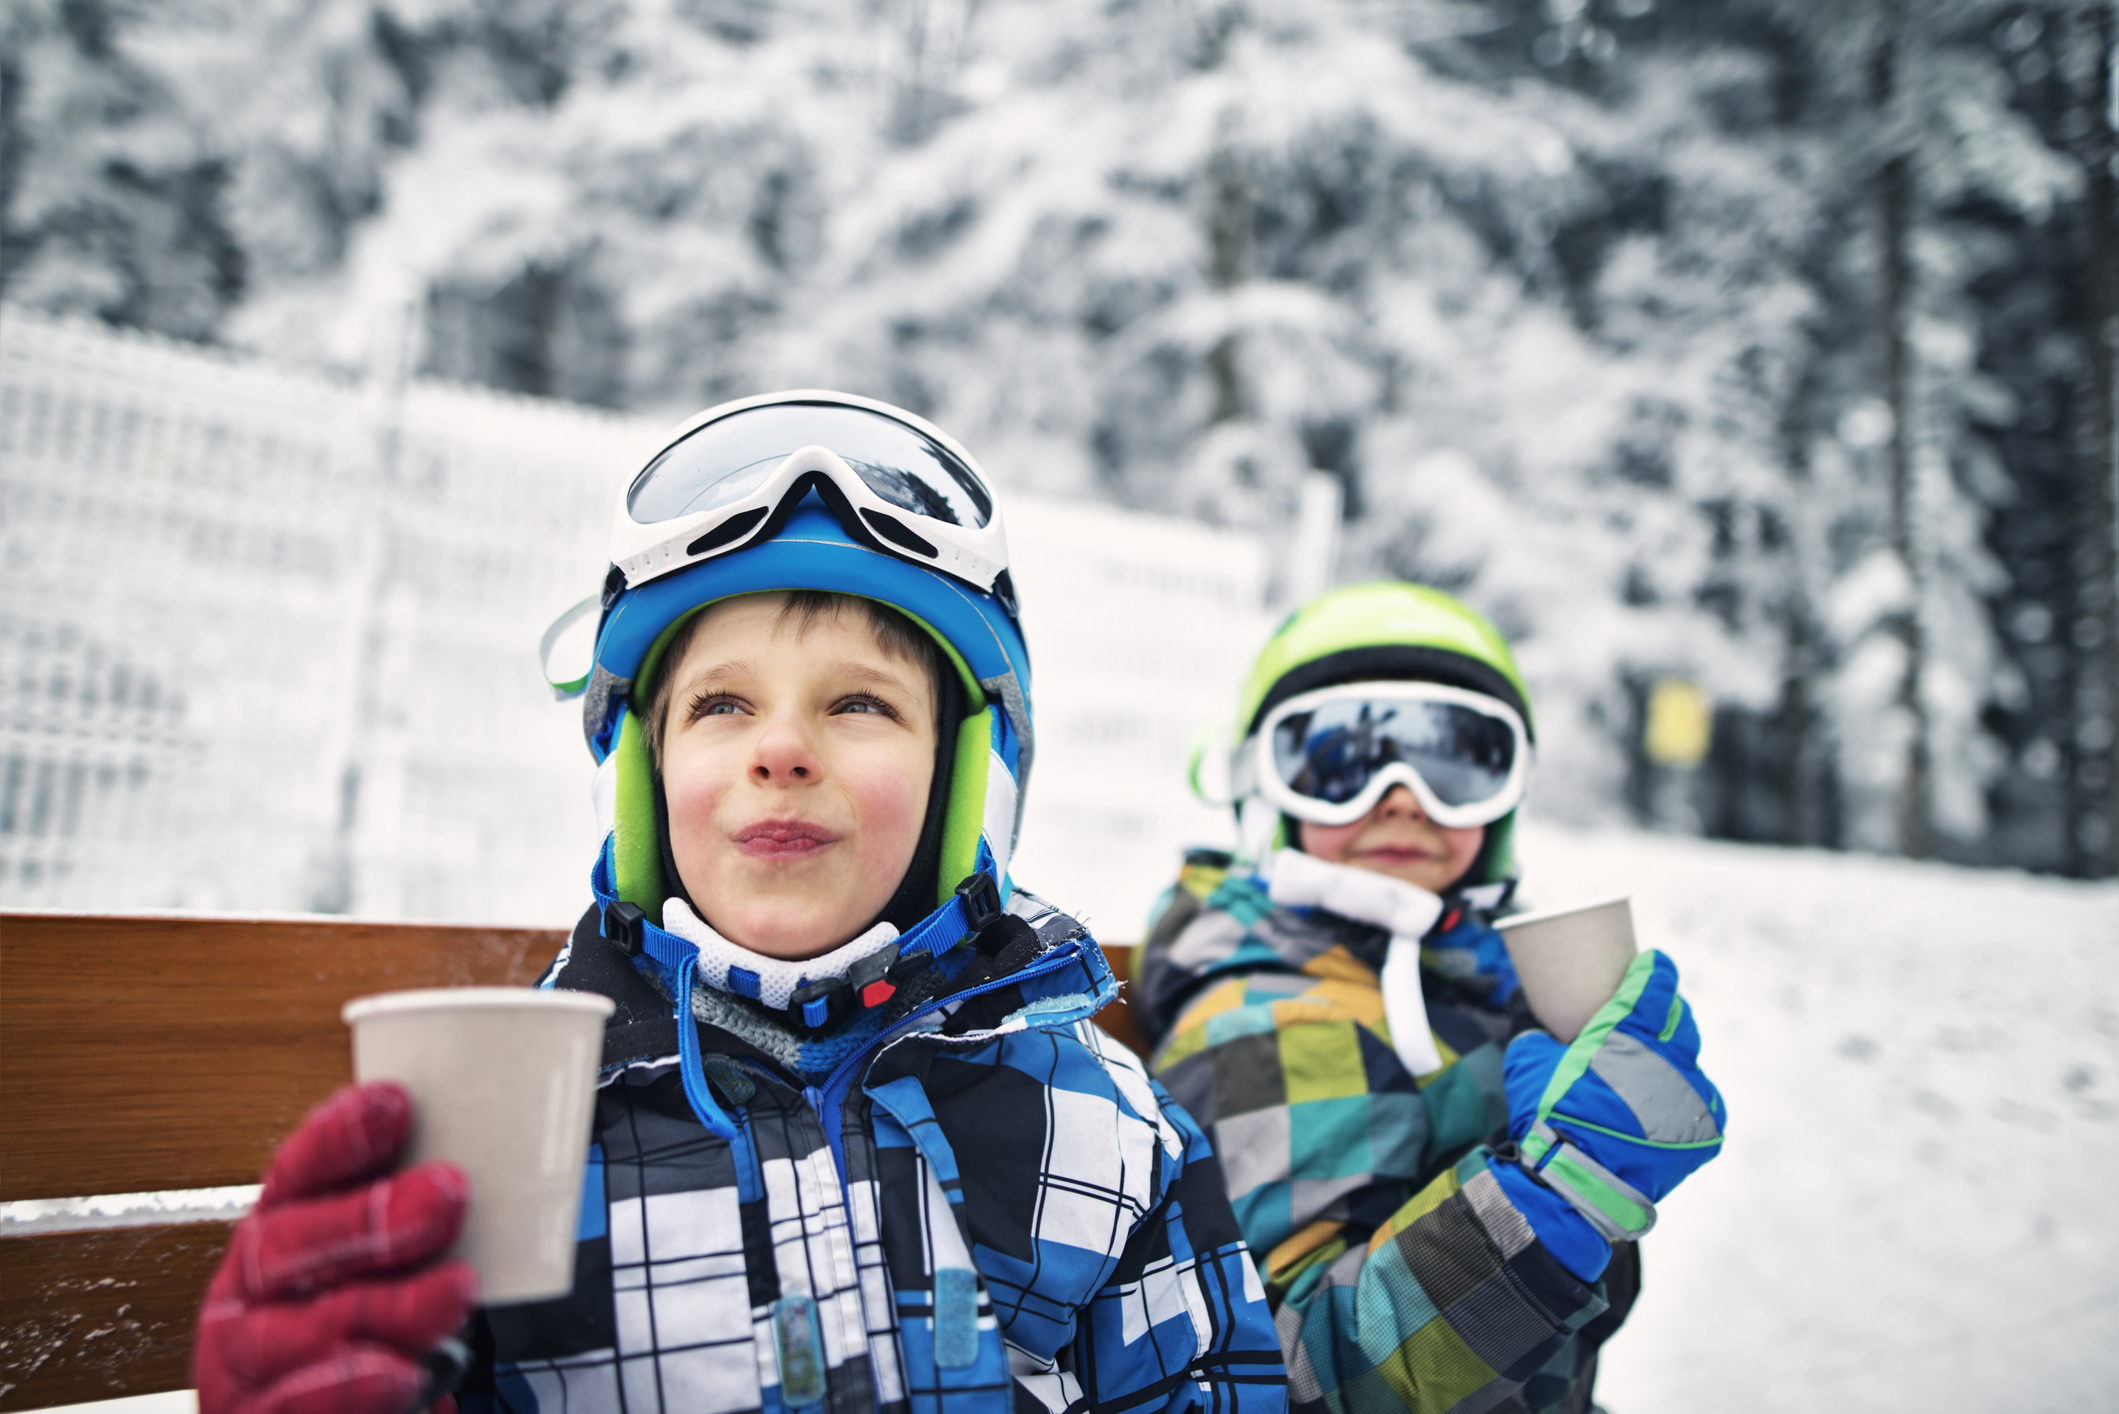 Kids in snow gear drinking hot chocolate